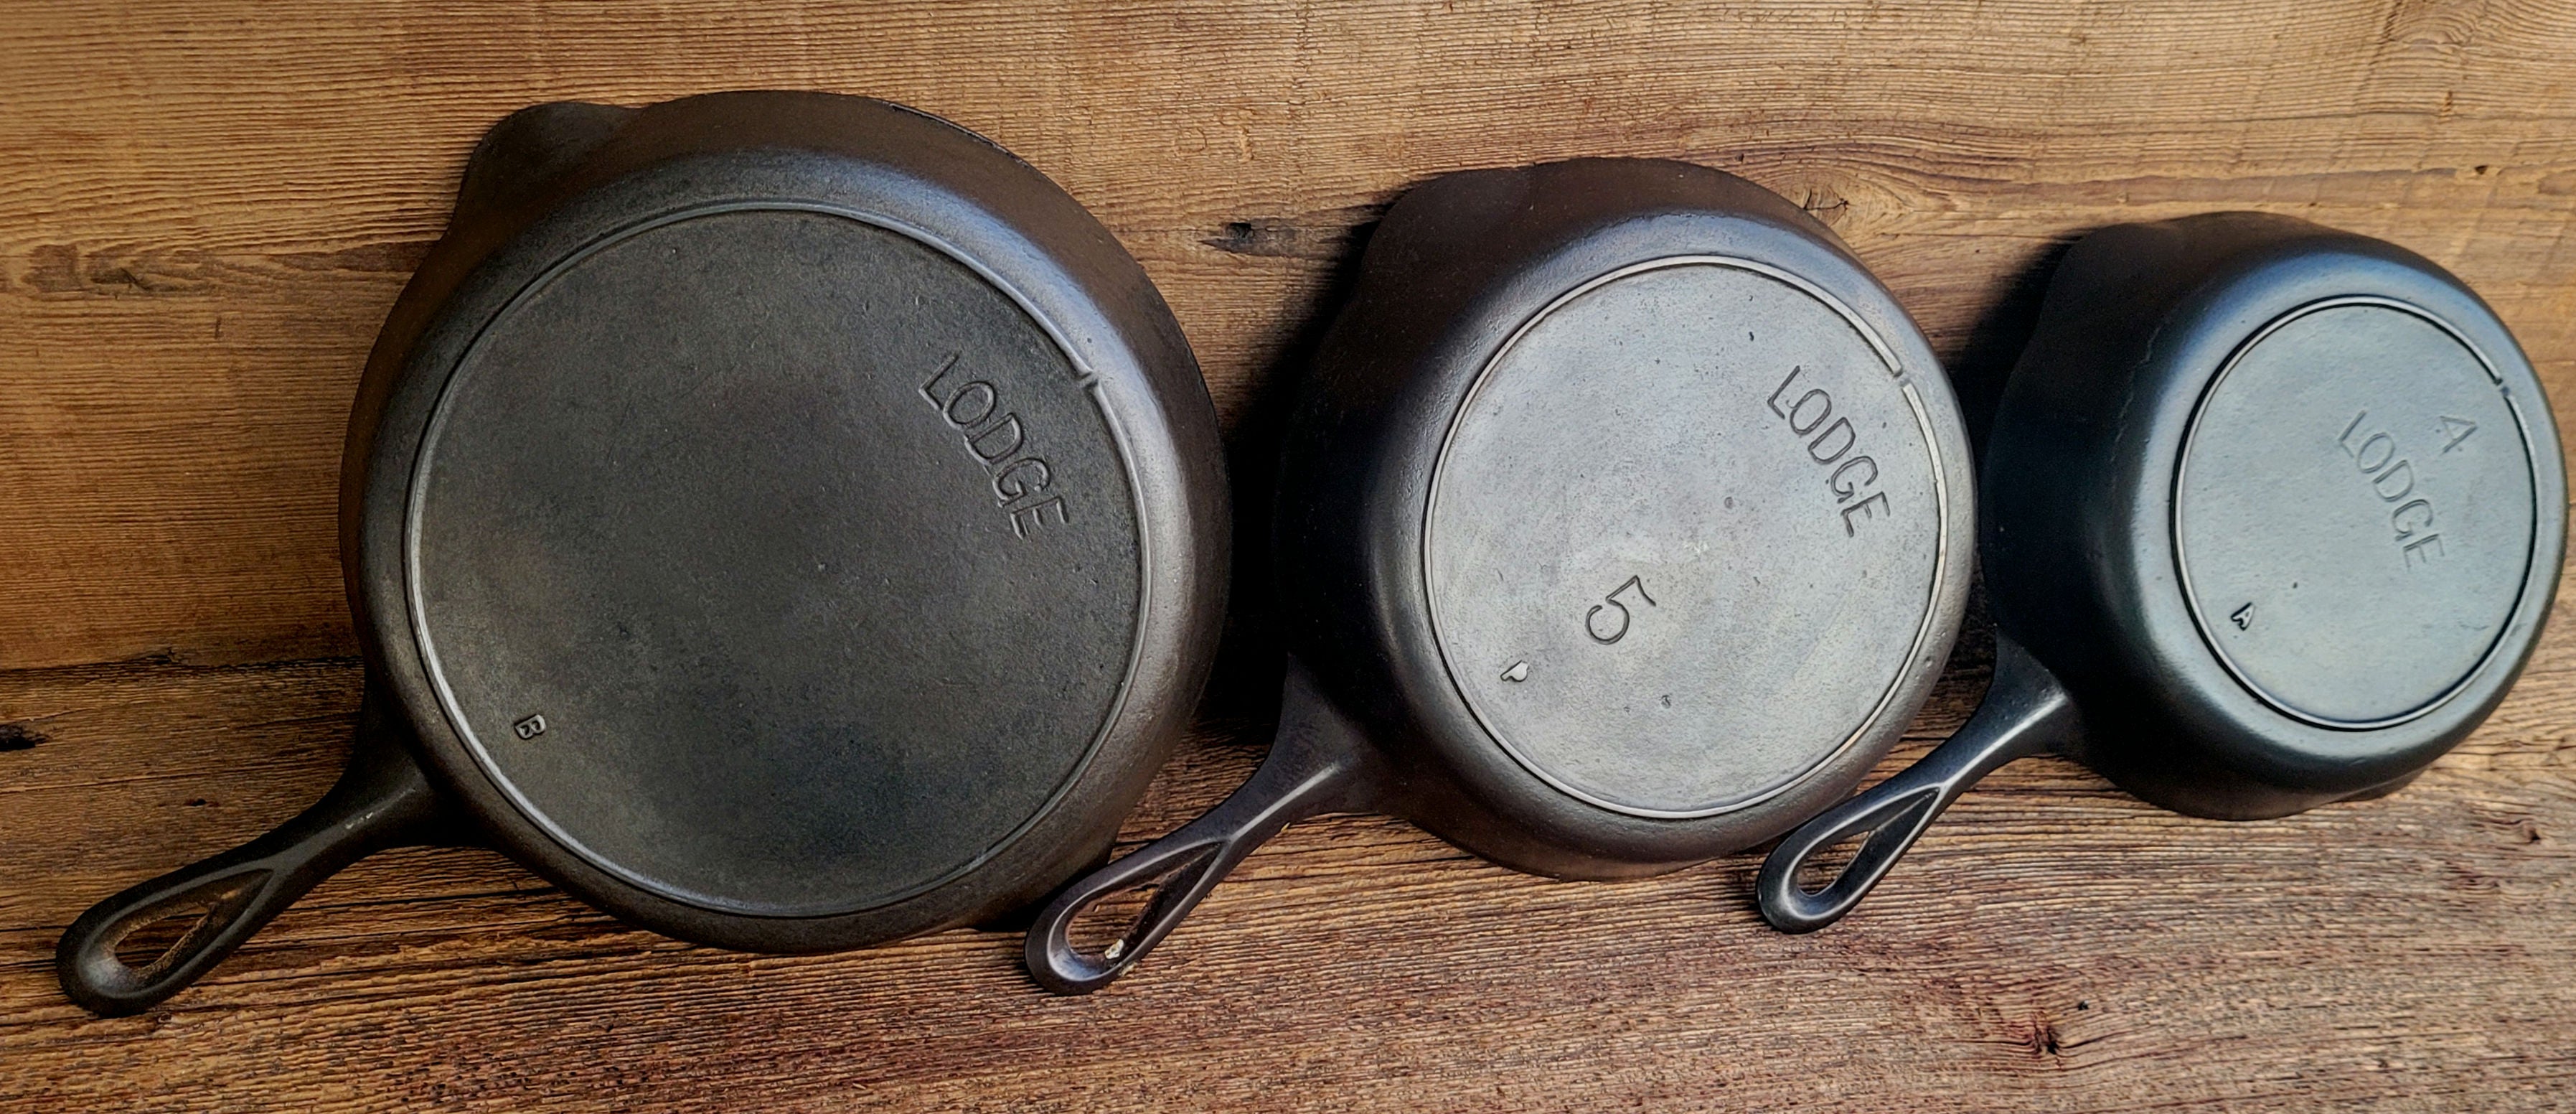 Vintage Cast Iron, Fully Restored and on Sale - The New York Times